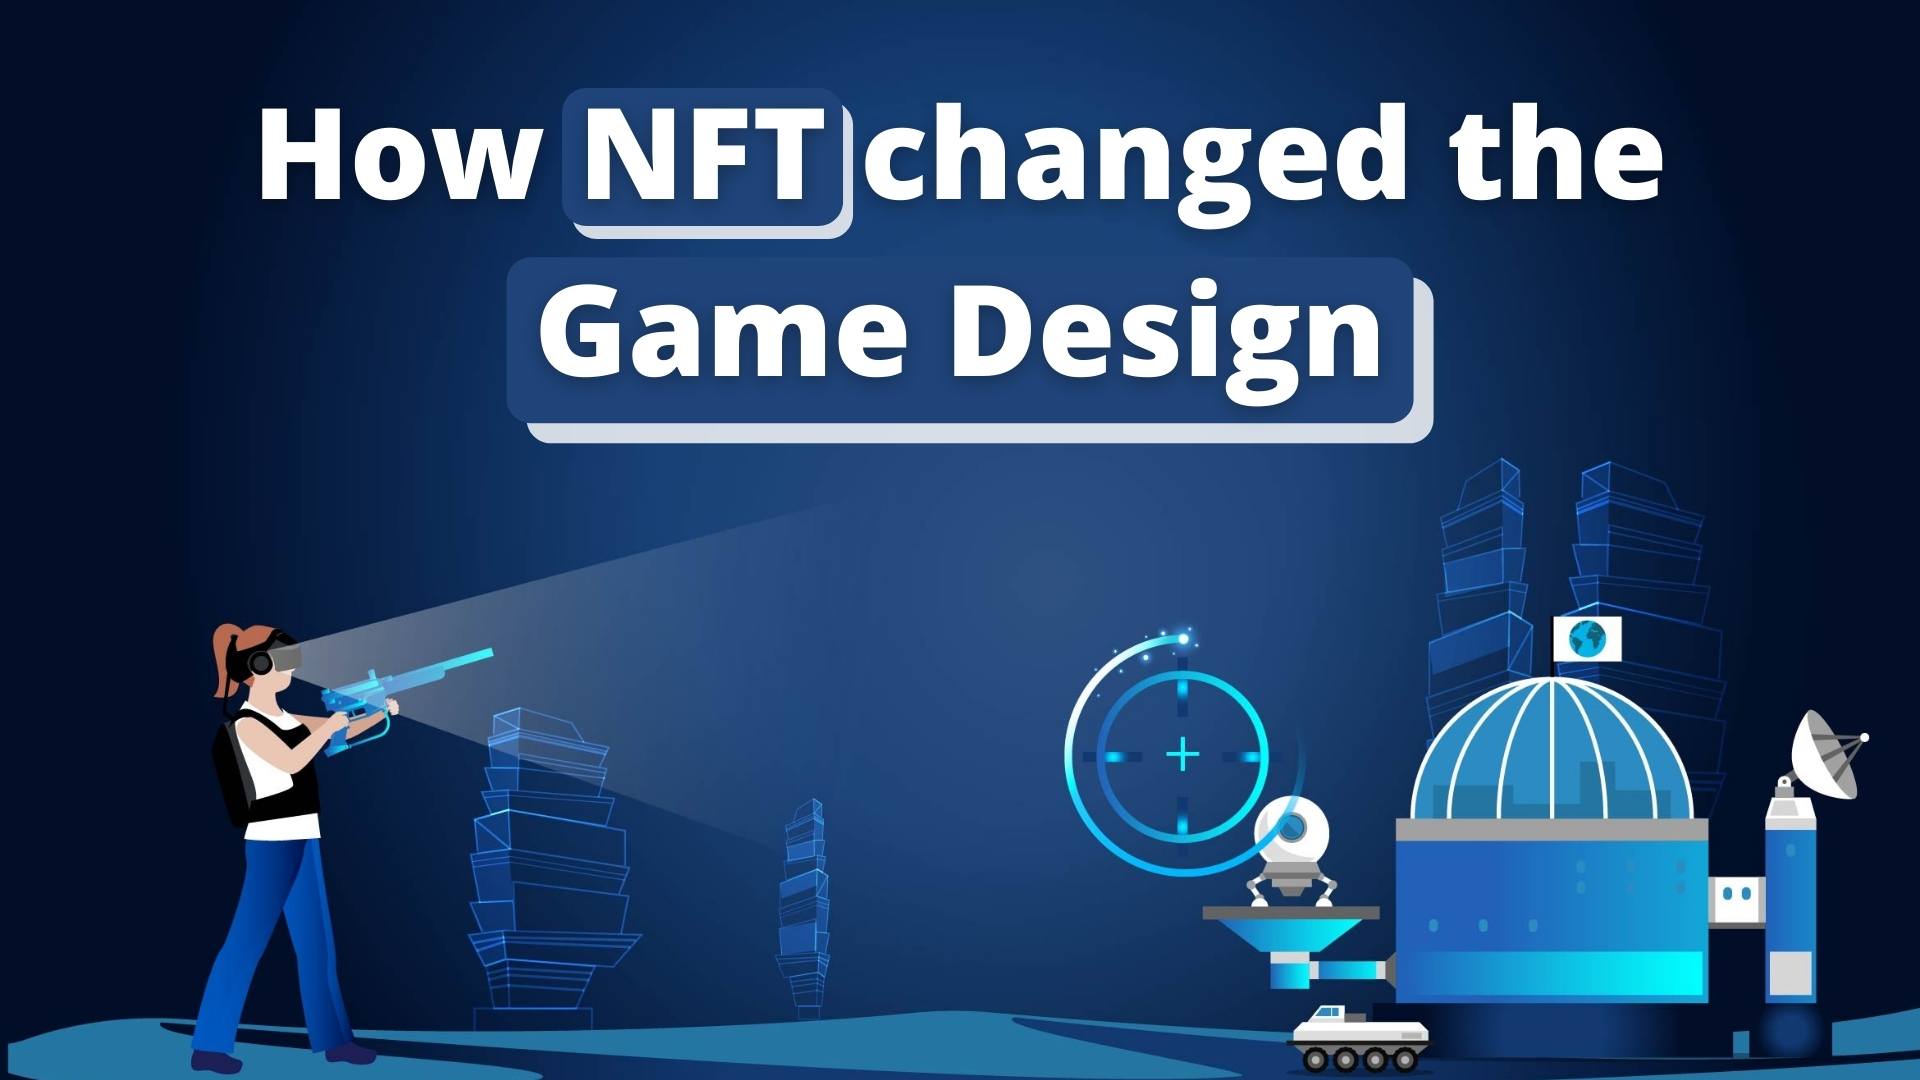 How NFT changed the game design